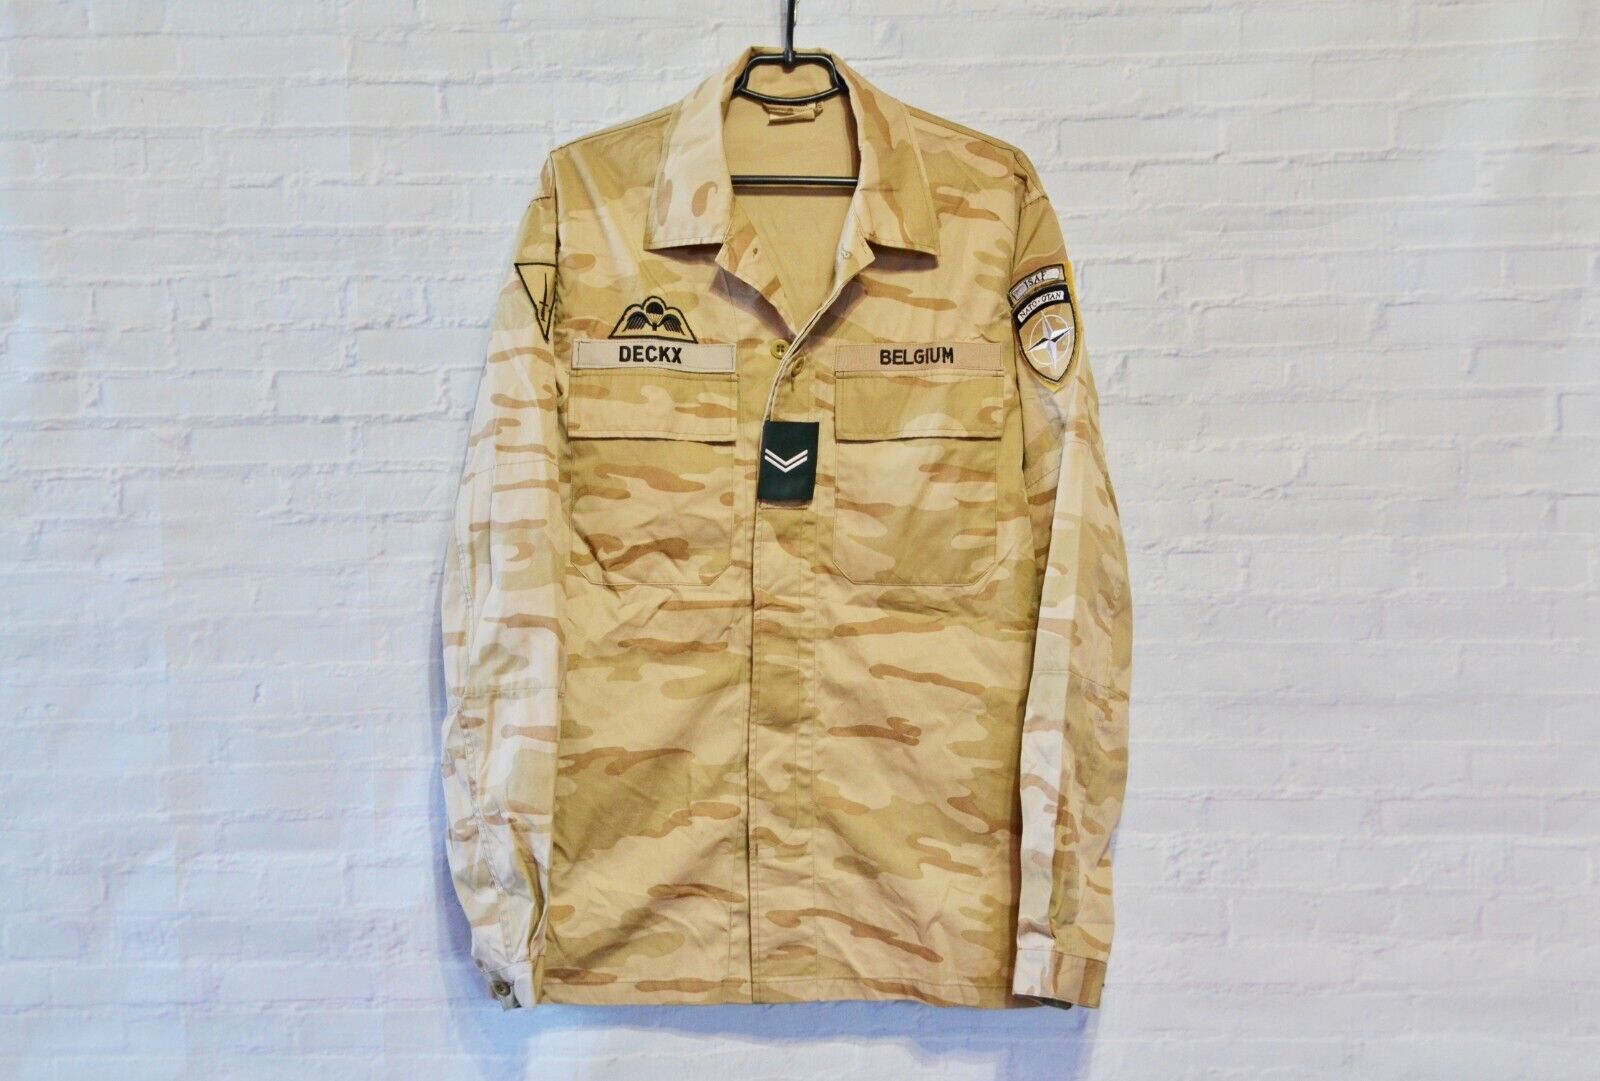 Belgian Army Military Desert camo Jacket Nato - Otan ISAF mission in Afghanistan